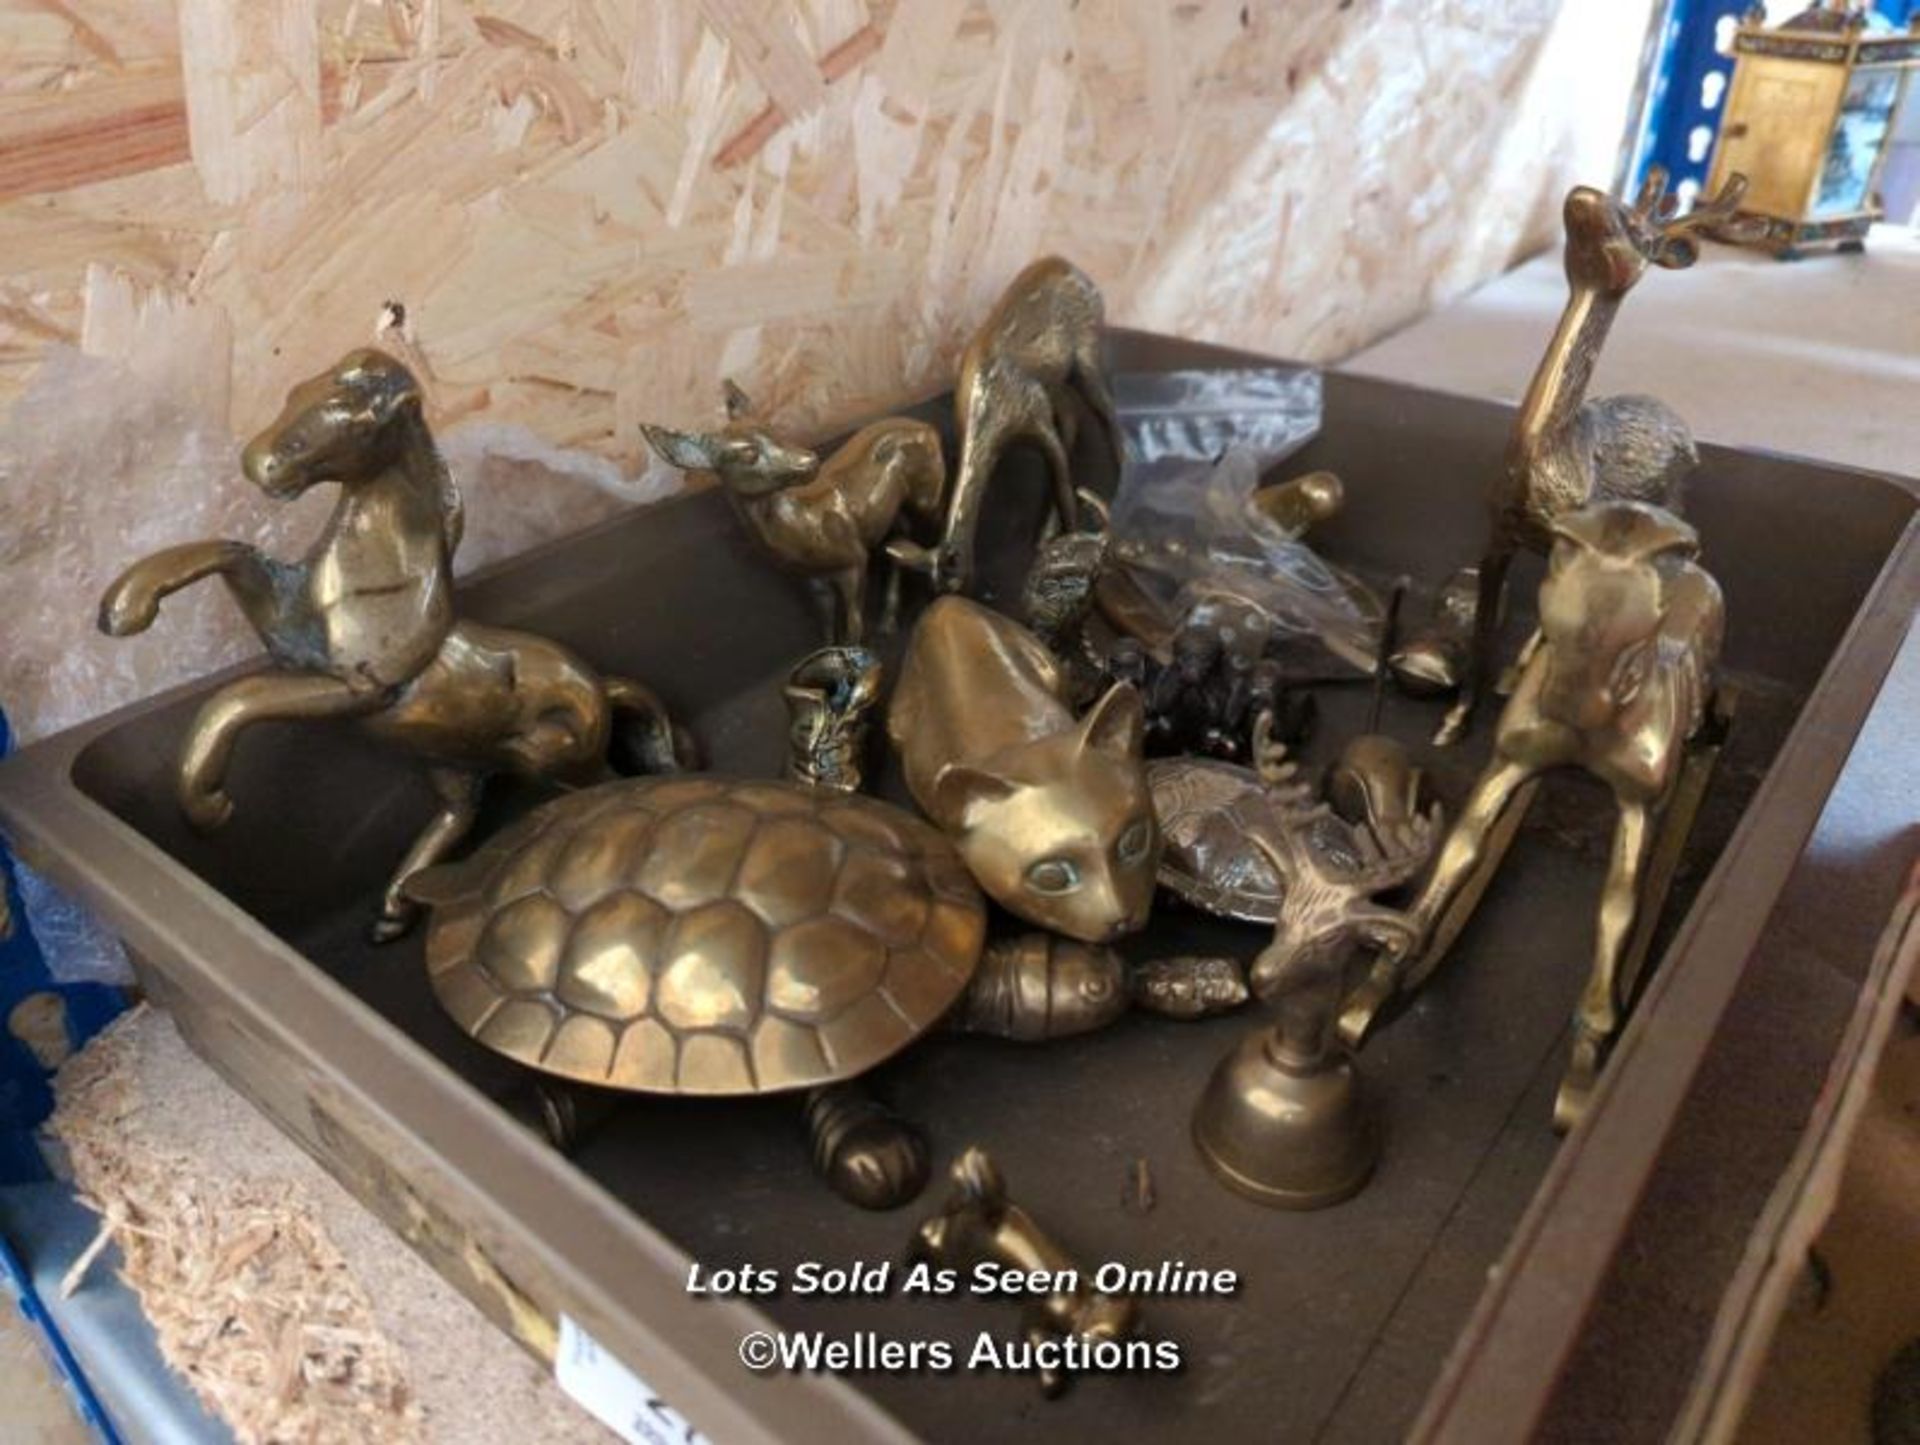 *QUANTITY OF VARIOUS BRASS ANIMALS INCLUDING DEERS, TURTLES, ETC. / ALL LOTS ARE LOCATED AT